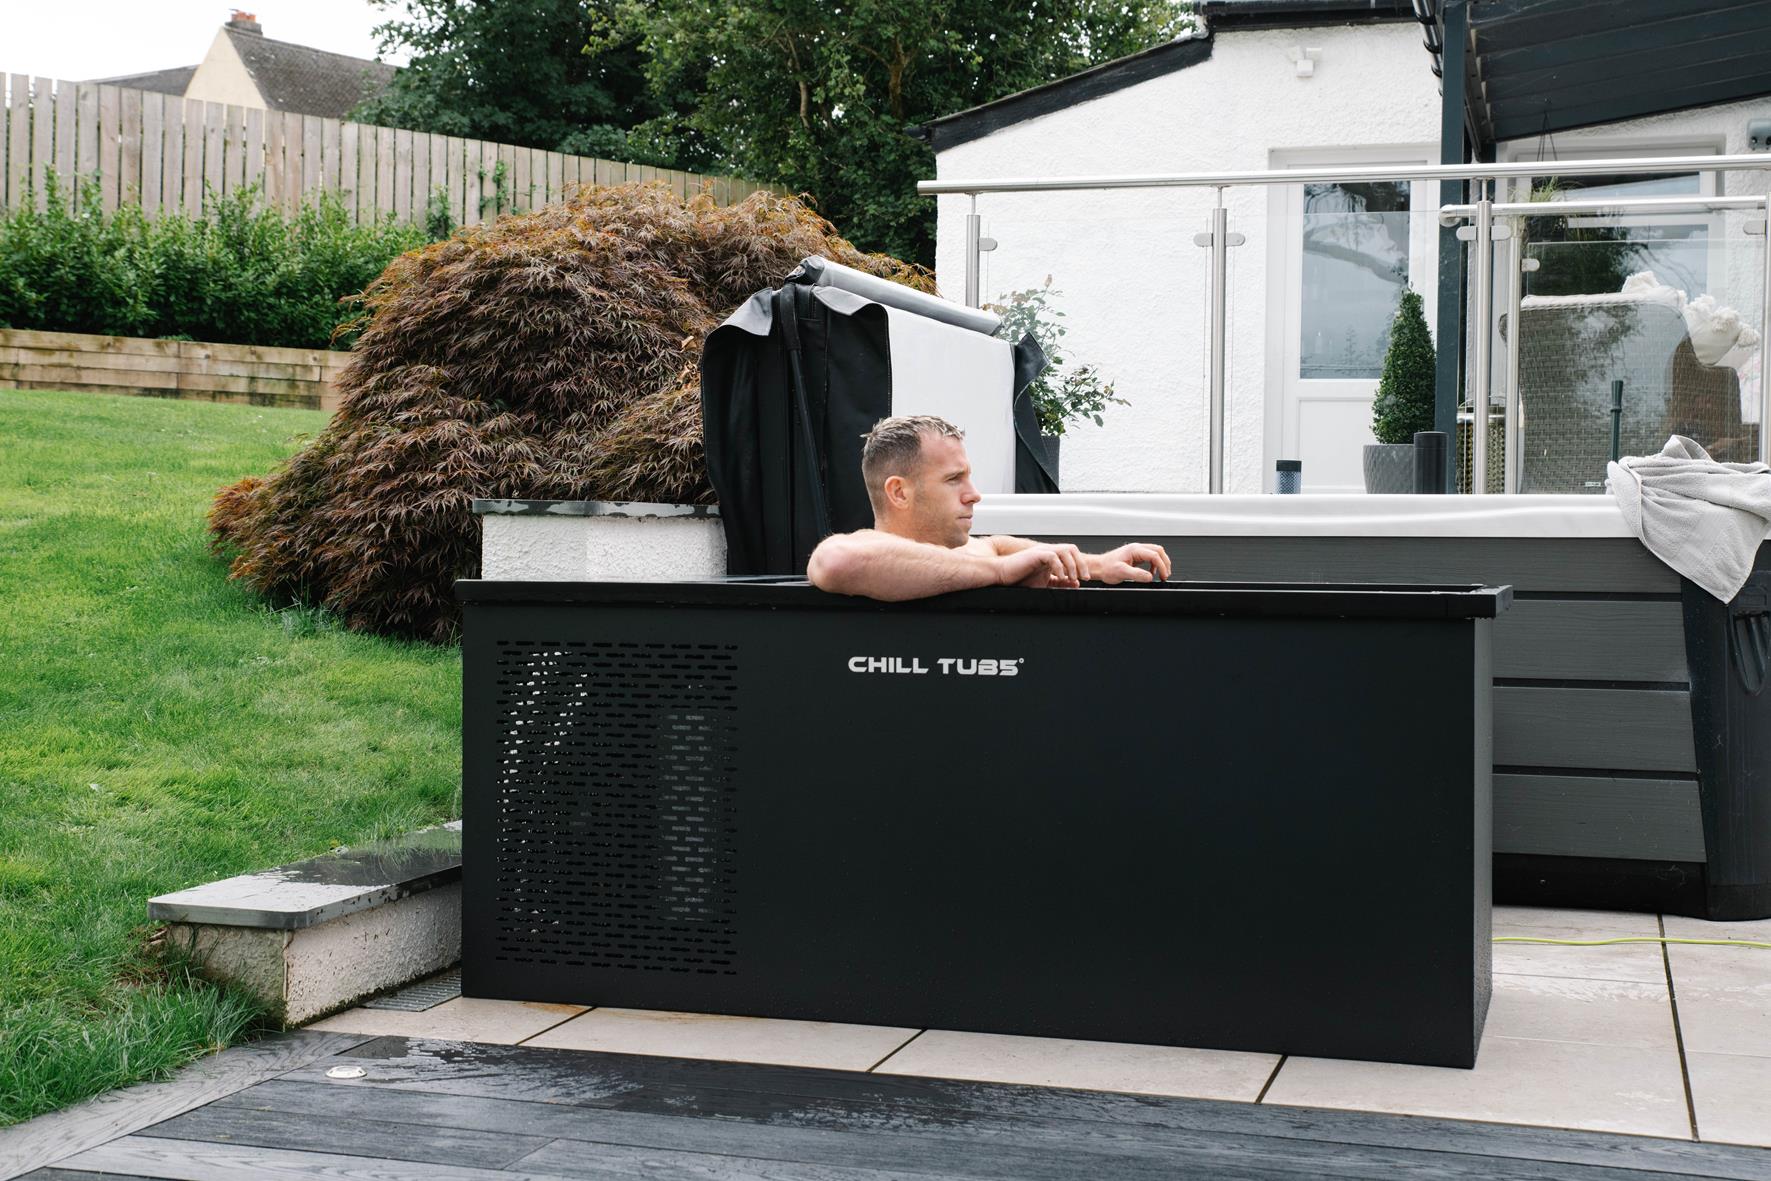 Wales international rugby union player Gareth Davies sat in the original chill tub